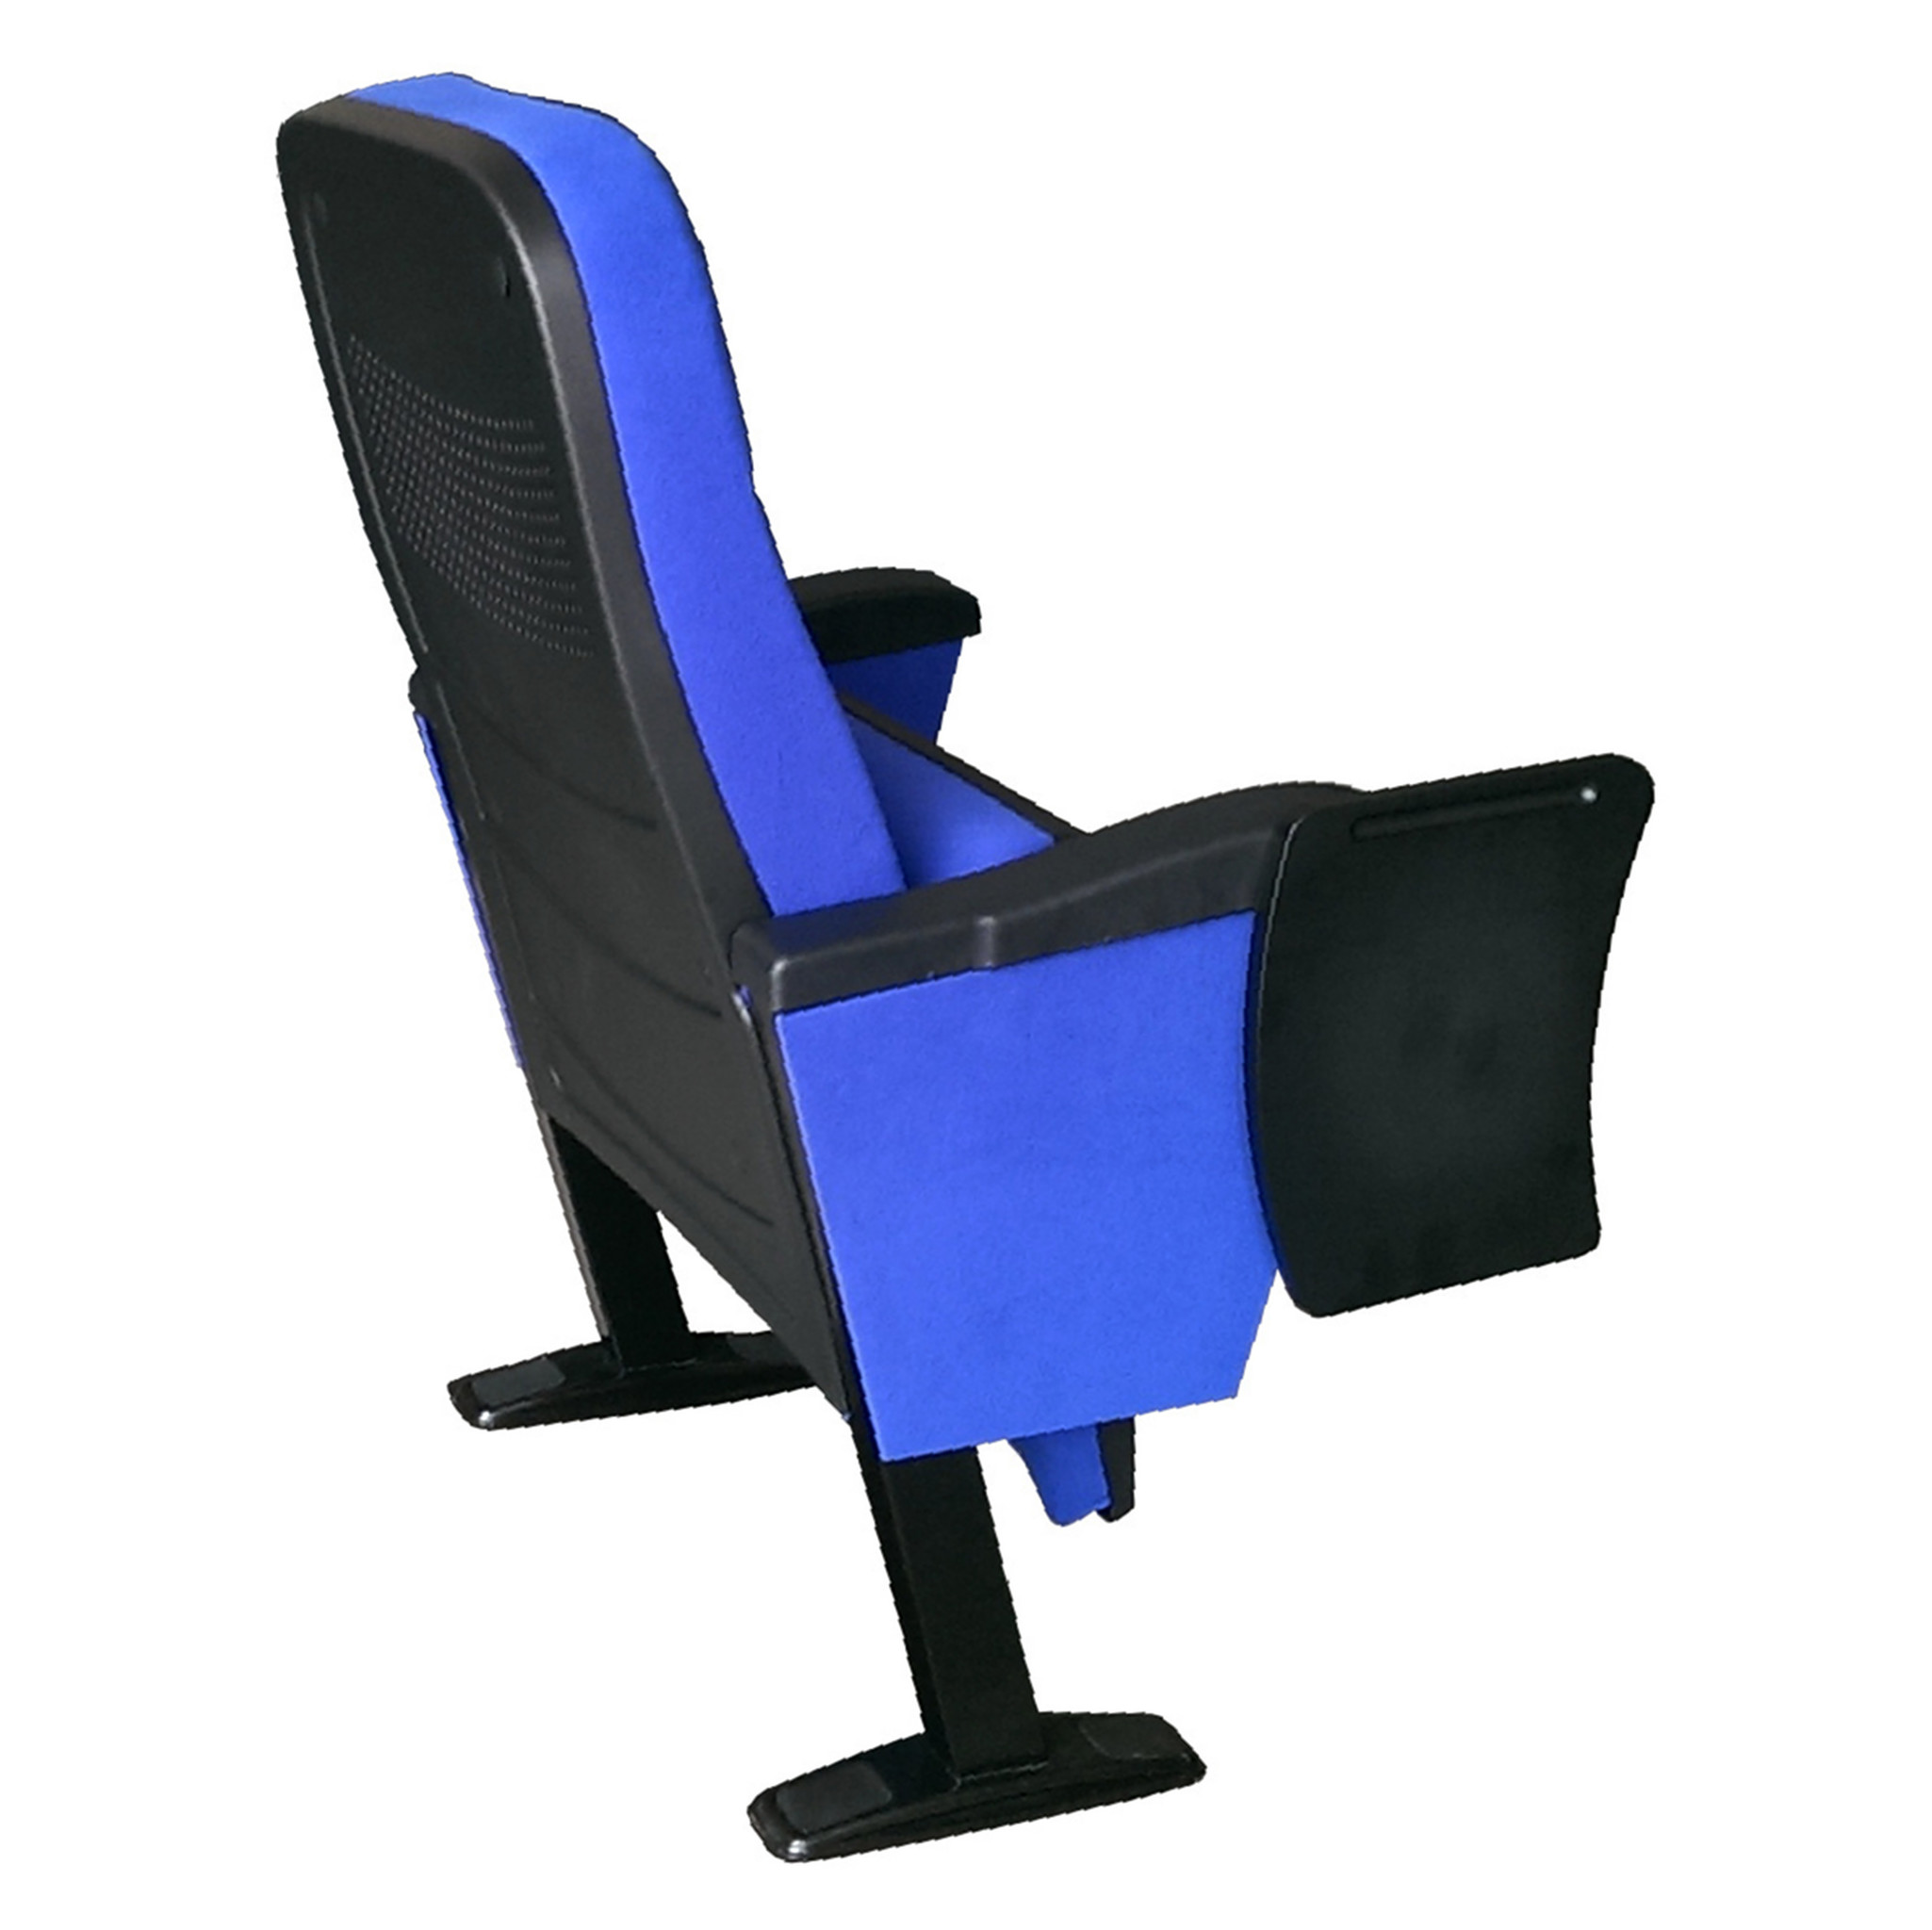 BOLTON Y40 - Auditorium, Theatre, Lecture Hall Chair With Writing Table (Plastic, Wooden or Polyurethange - Hidden Inside or Anti-Panic Mechanism) - Turkey - Seatorium - Public Seating Manufacturer